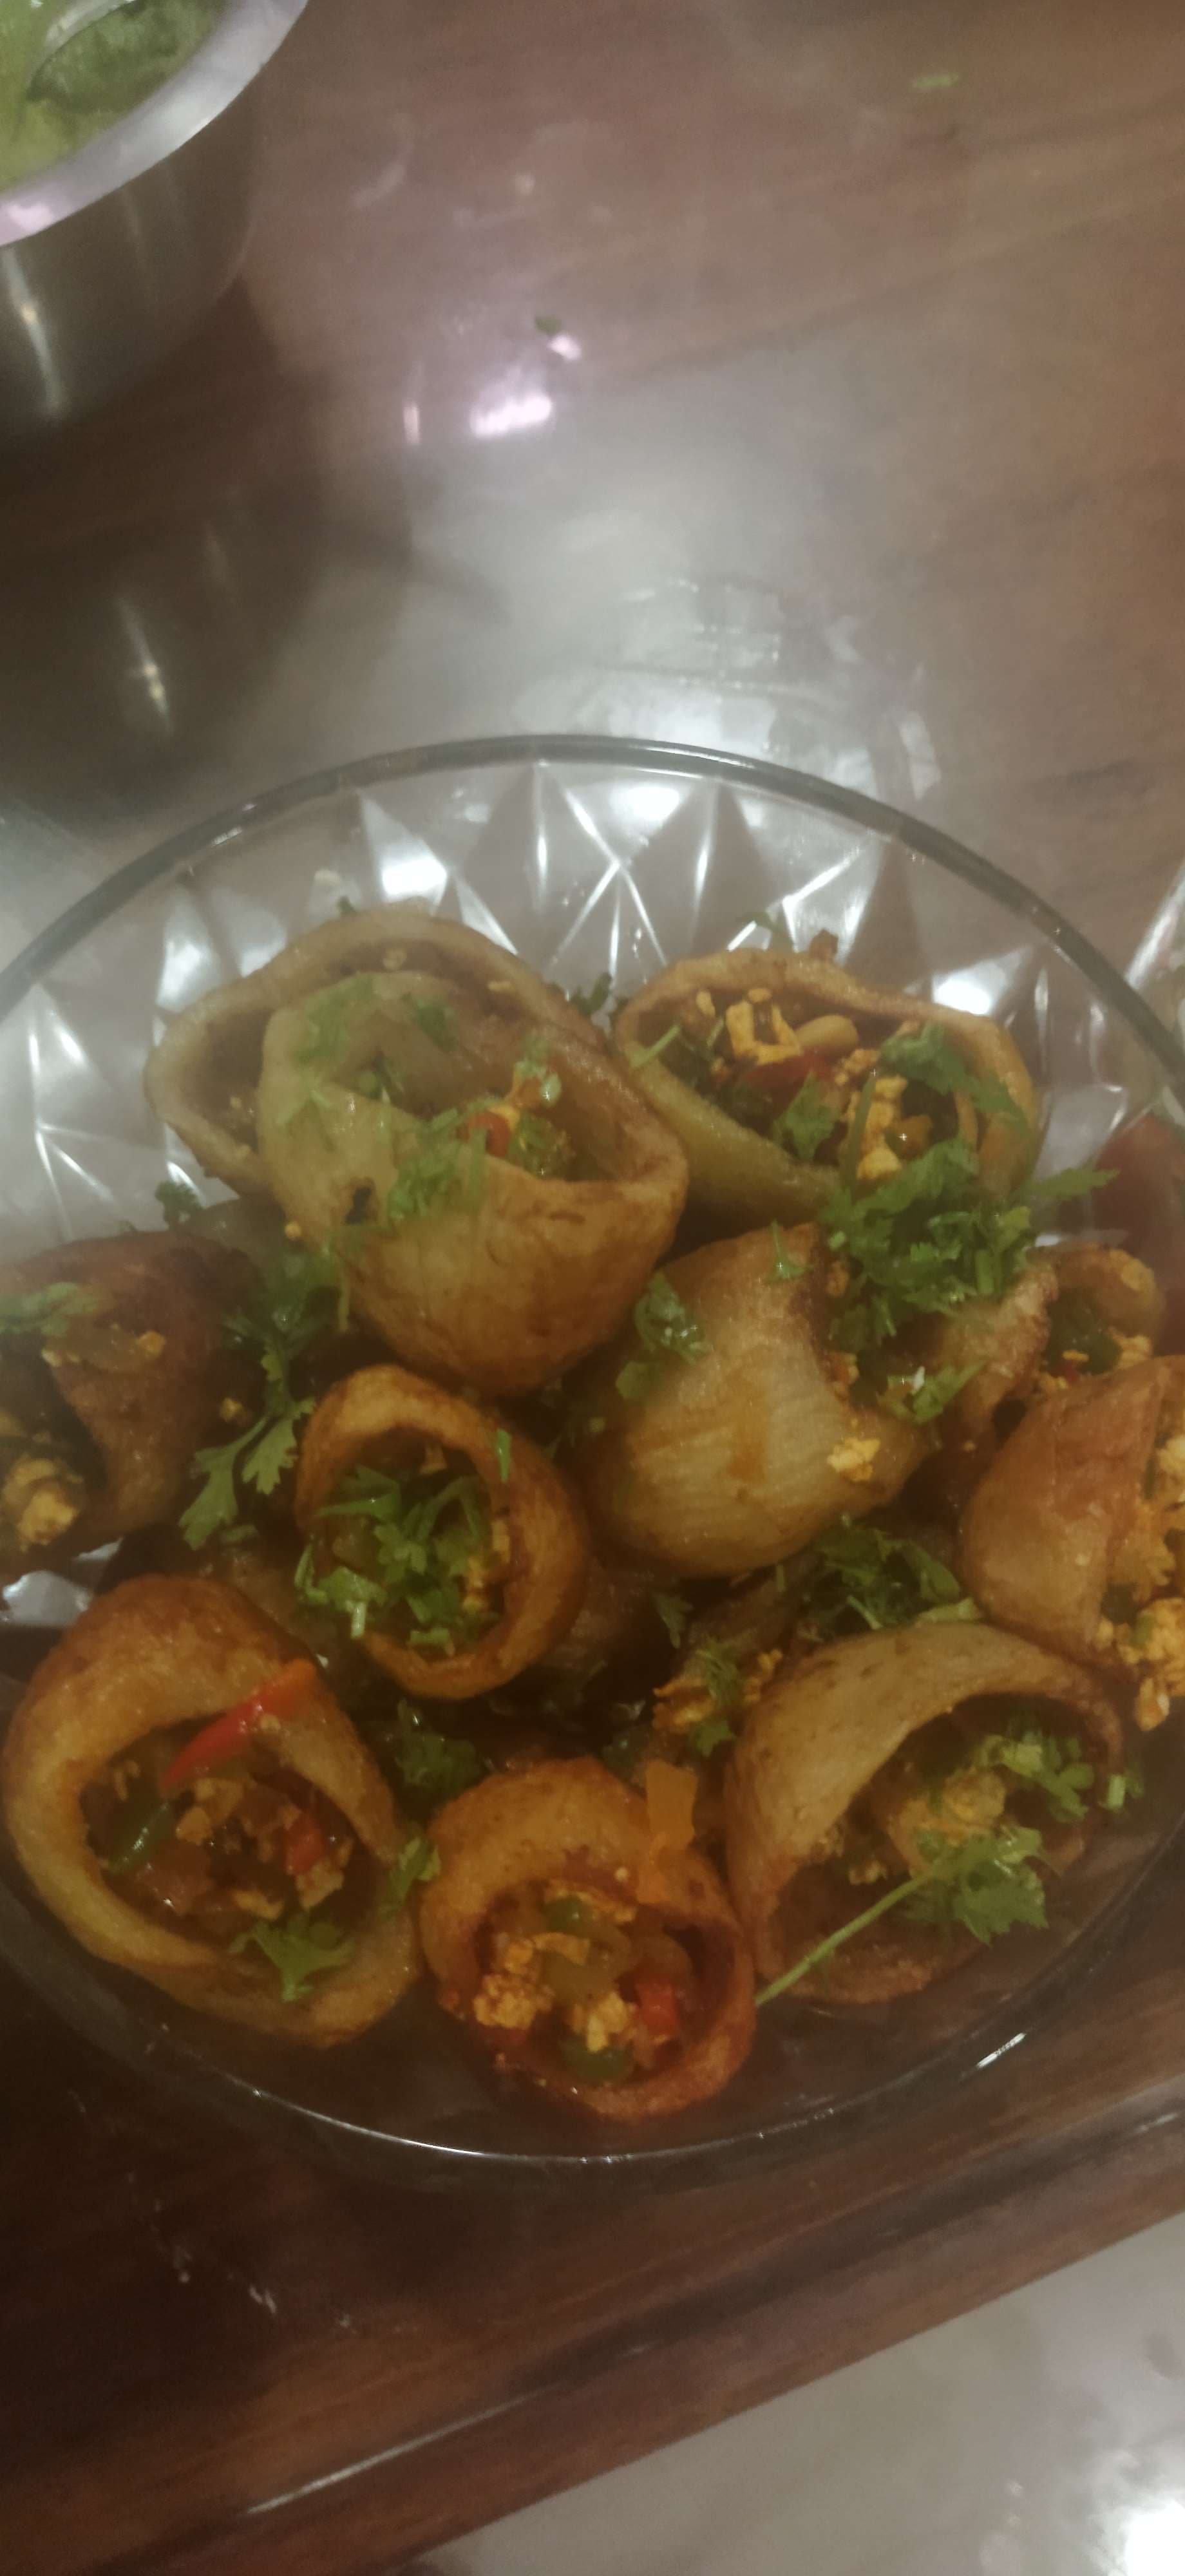 Tasty Stuffed Potatoes (Gravy) cooked by COOX chefs cooks during occasions parties events at home